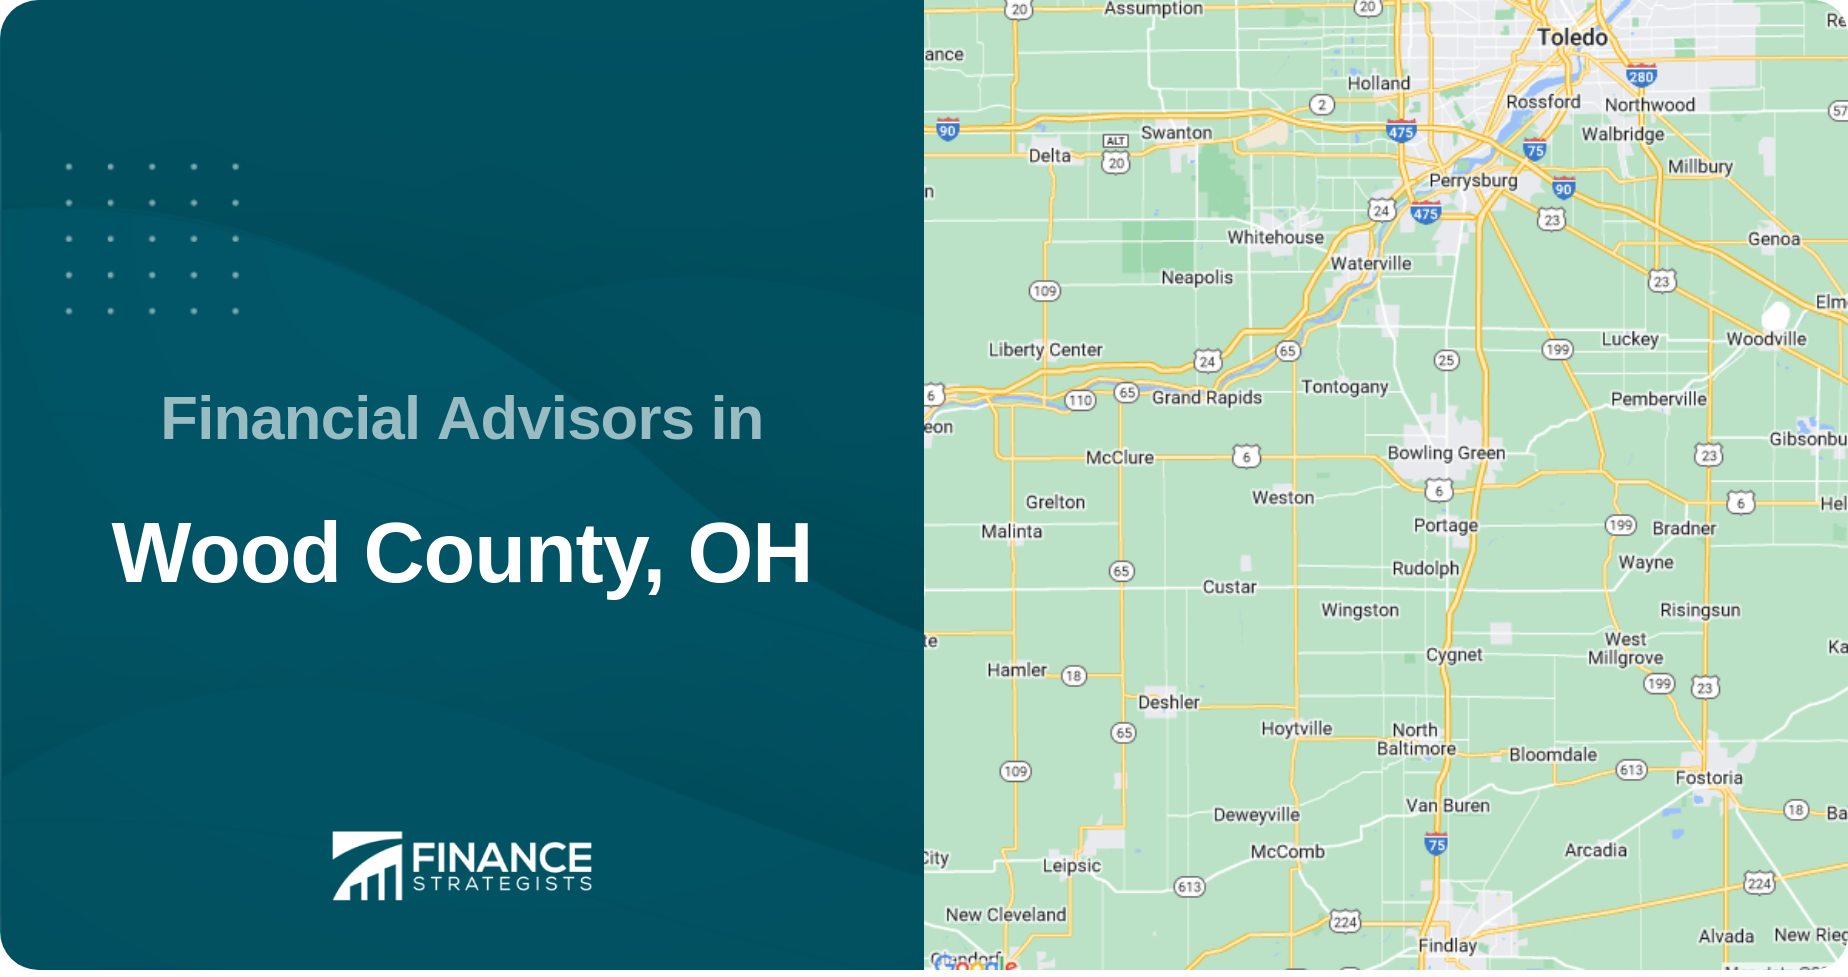 Financial Advisors in Wood County, OH